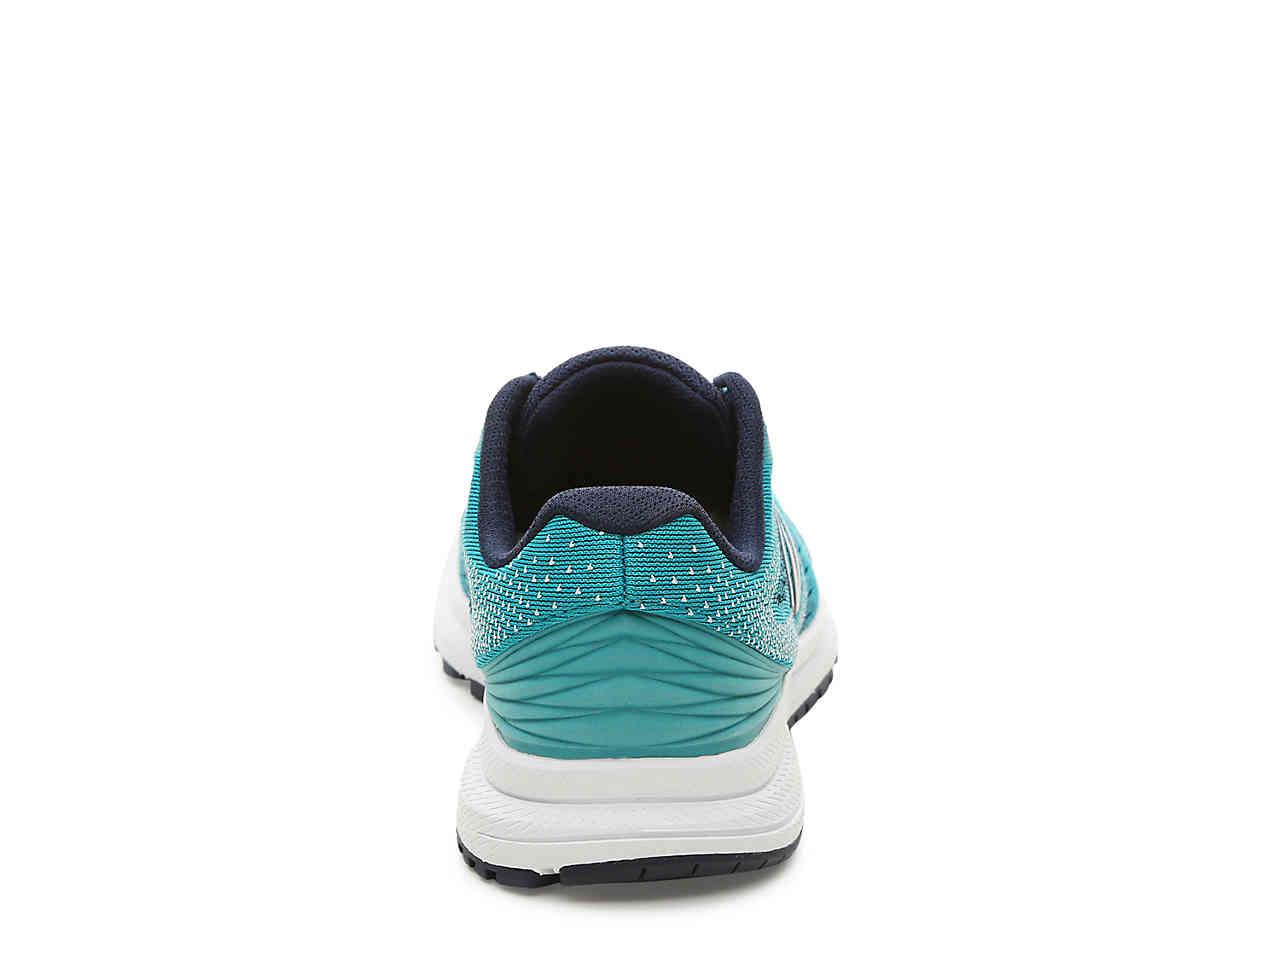 New Balance Rubber Fuelcore Rush V3 Lightweight Running Shoe in Teal/Navy  (Blue) | Lyst